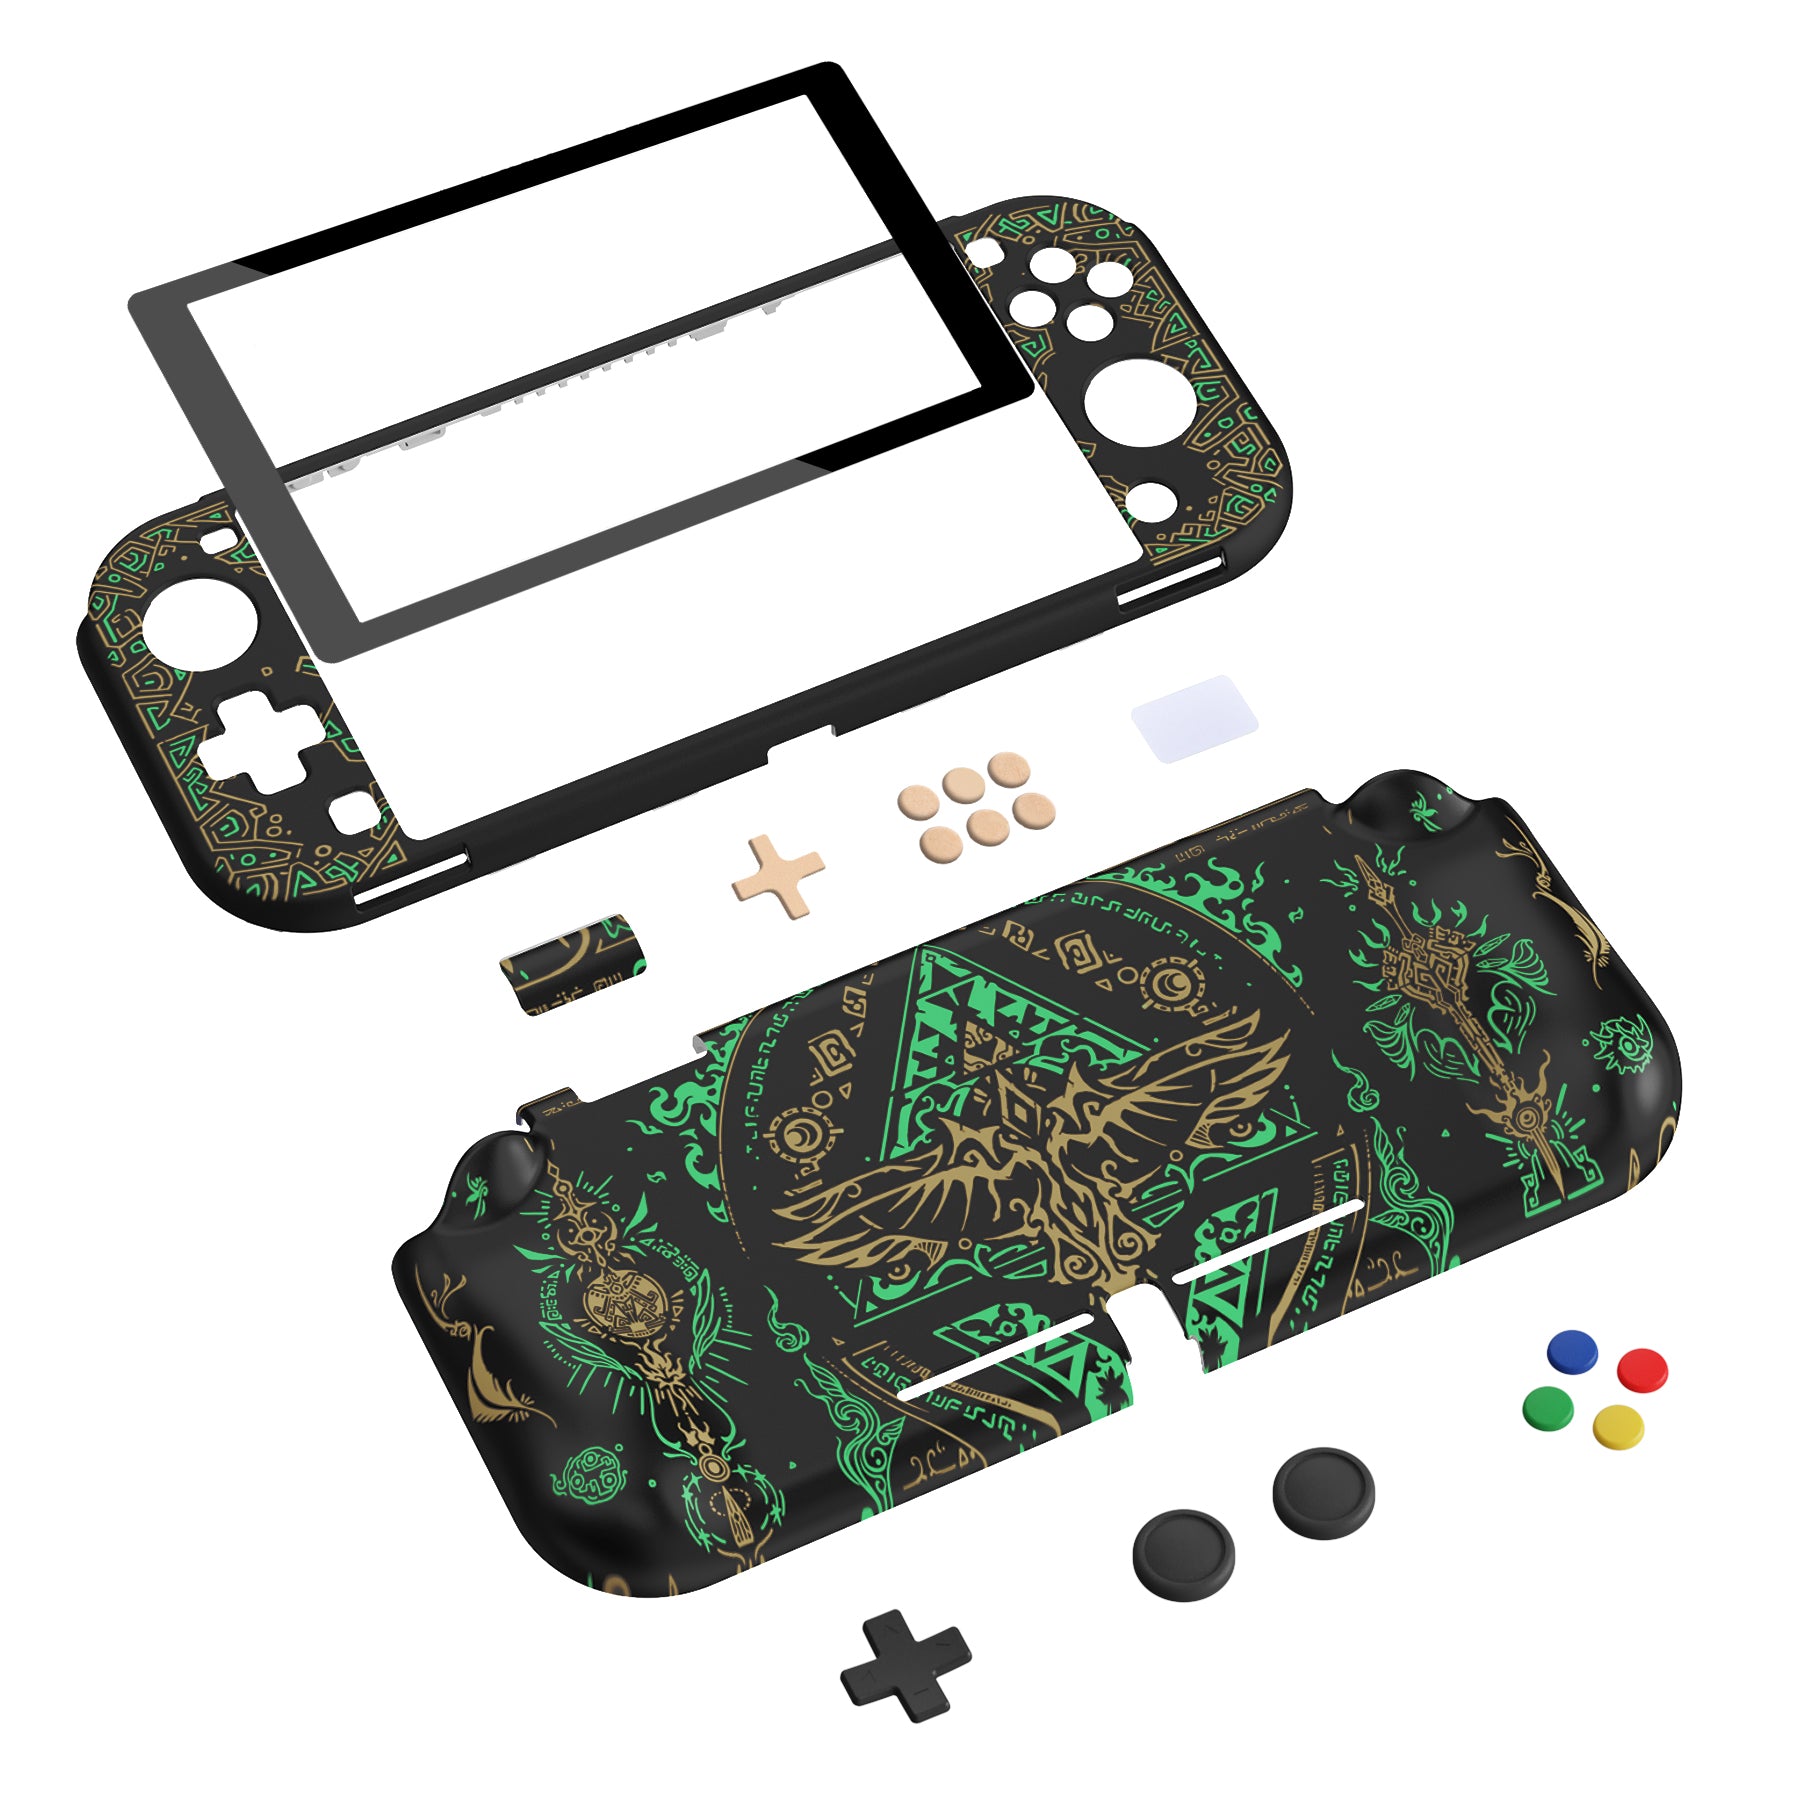 PlayVital ZealProtect Protective Case for Nintendo Switch Lite, Hard Shell Ergonomic Grip Cover for Nintendo Switch Lite w/Screen Protector & Thumb Grip Caps & Button Caps - Totem of Kingdom - PSLYR002 playvital